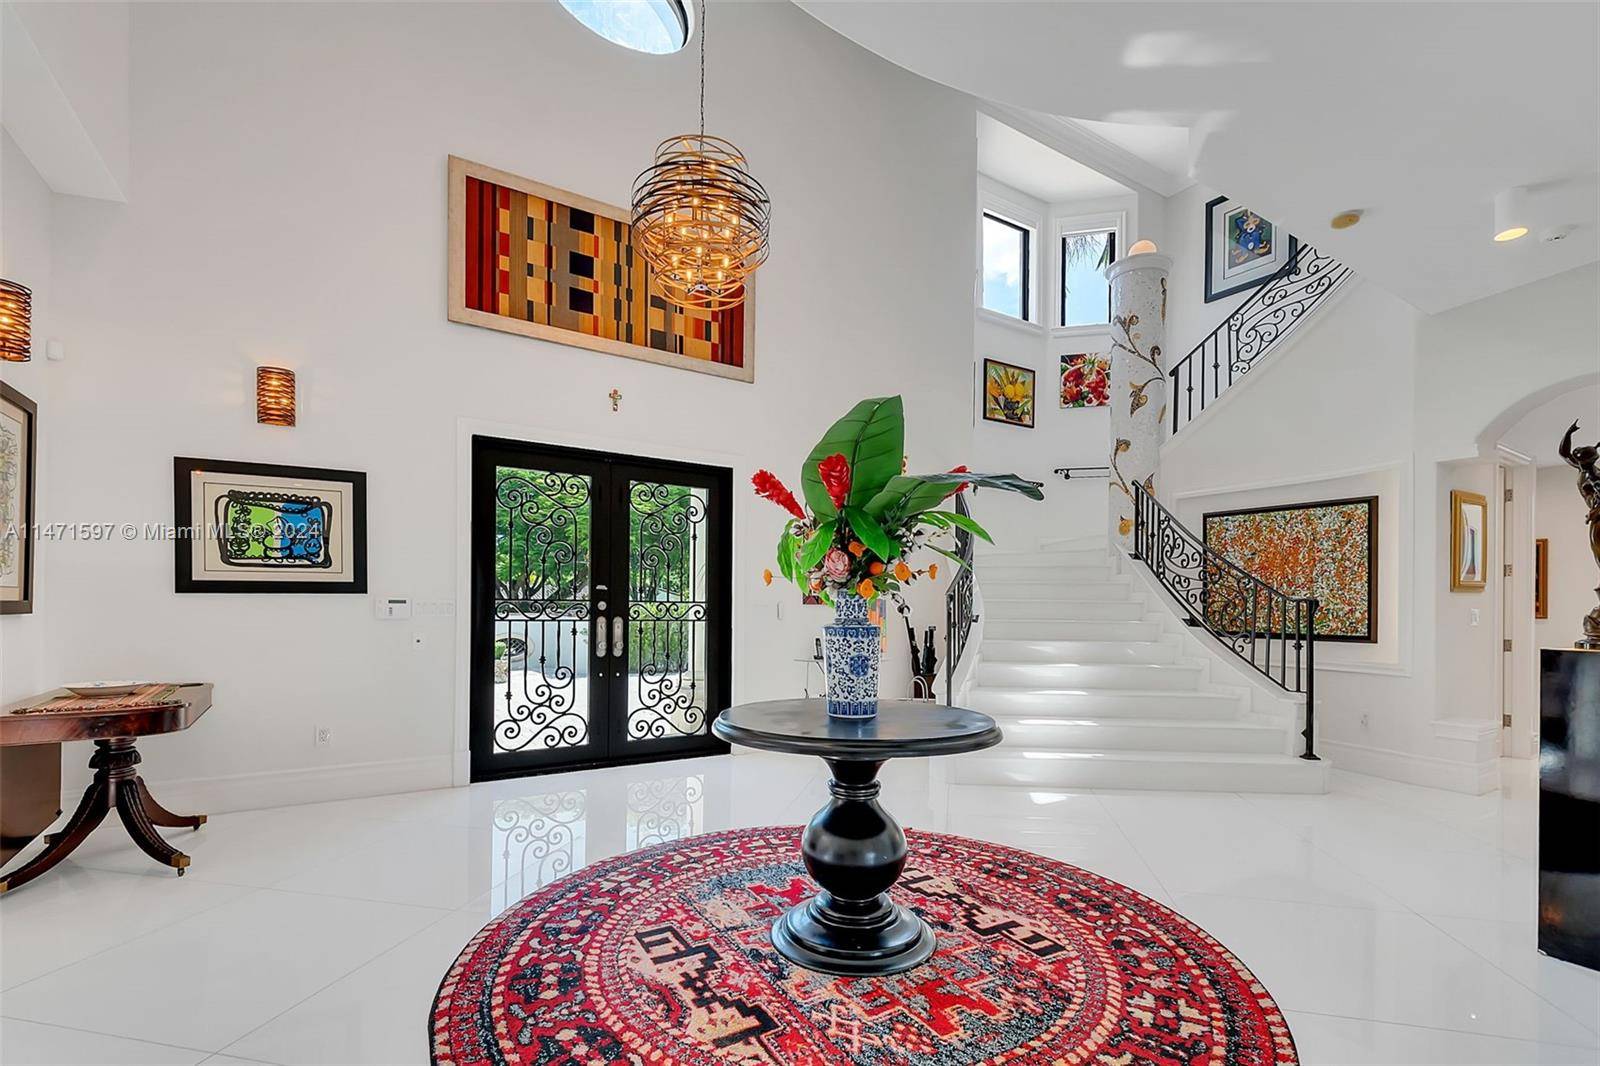 Absolutely stunning ! This 9 bedroom, 8 full bath, 2 half bath villa in the heart of Miami is a true masterpiece.